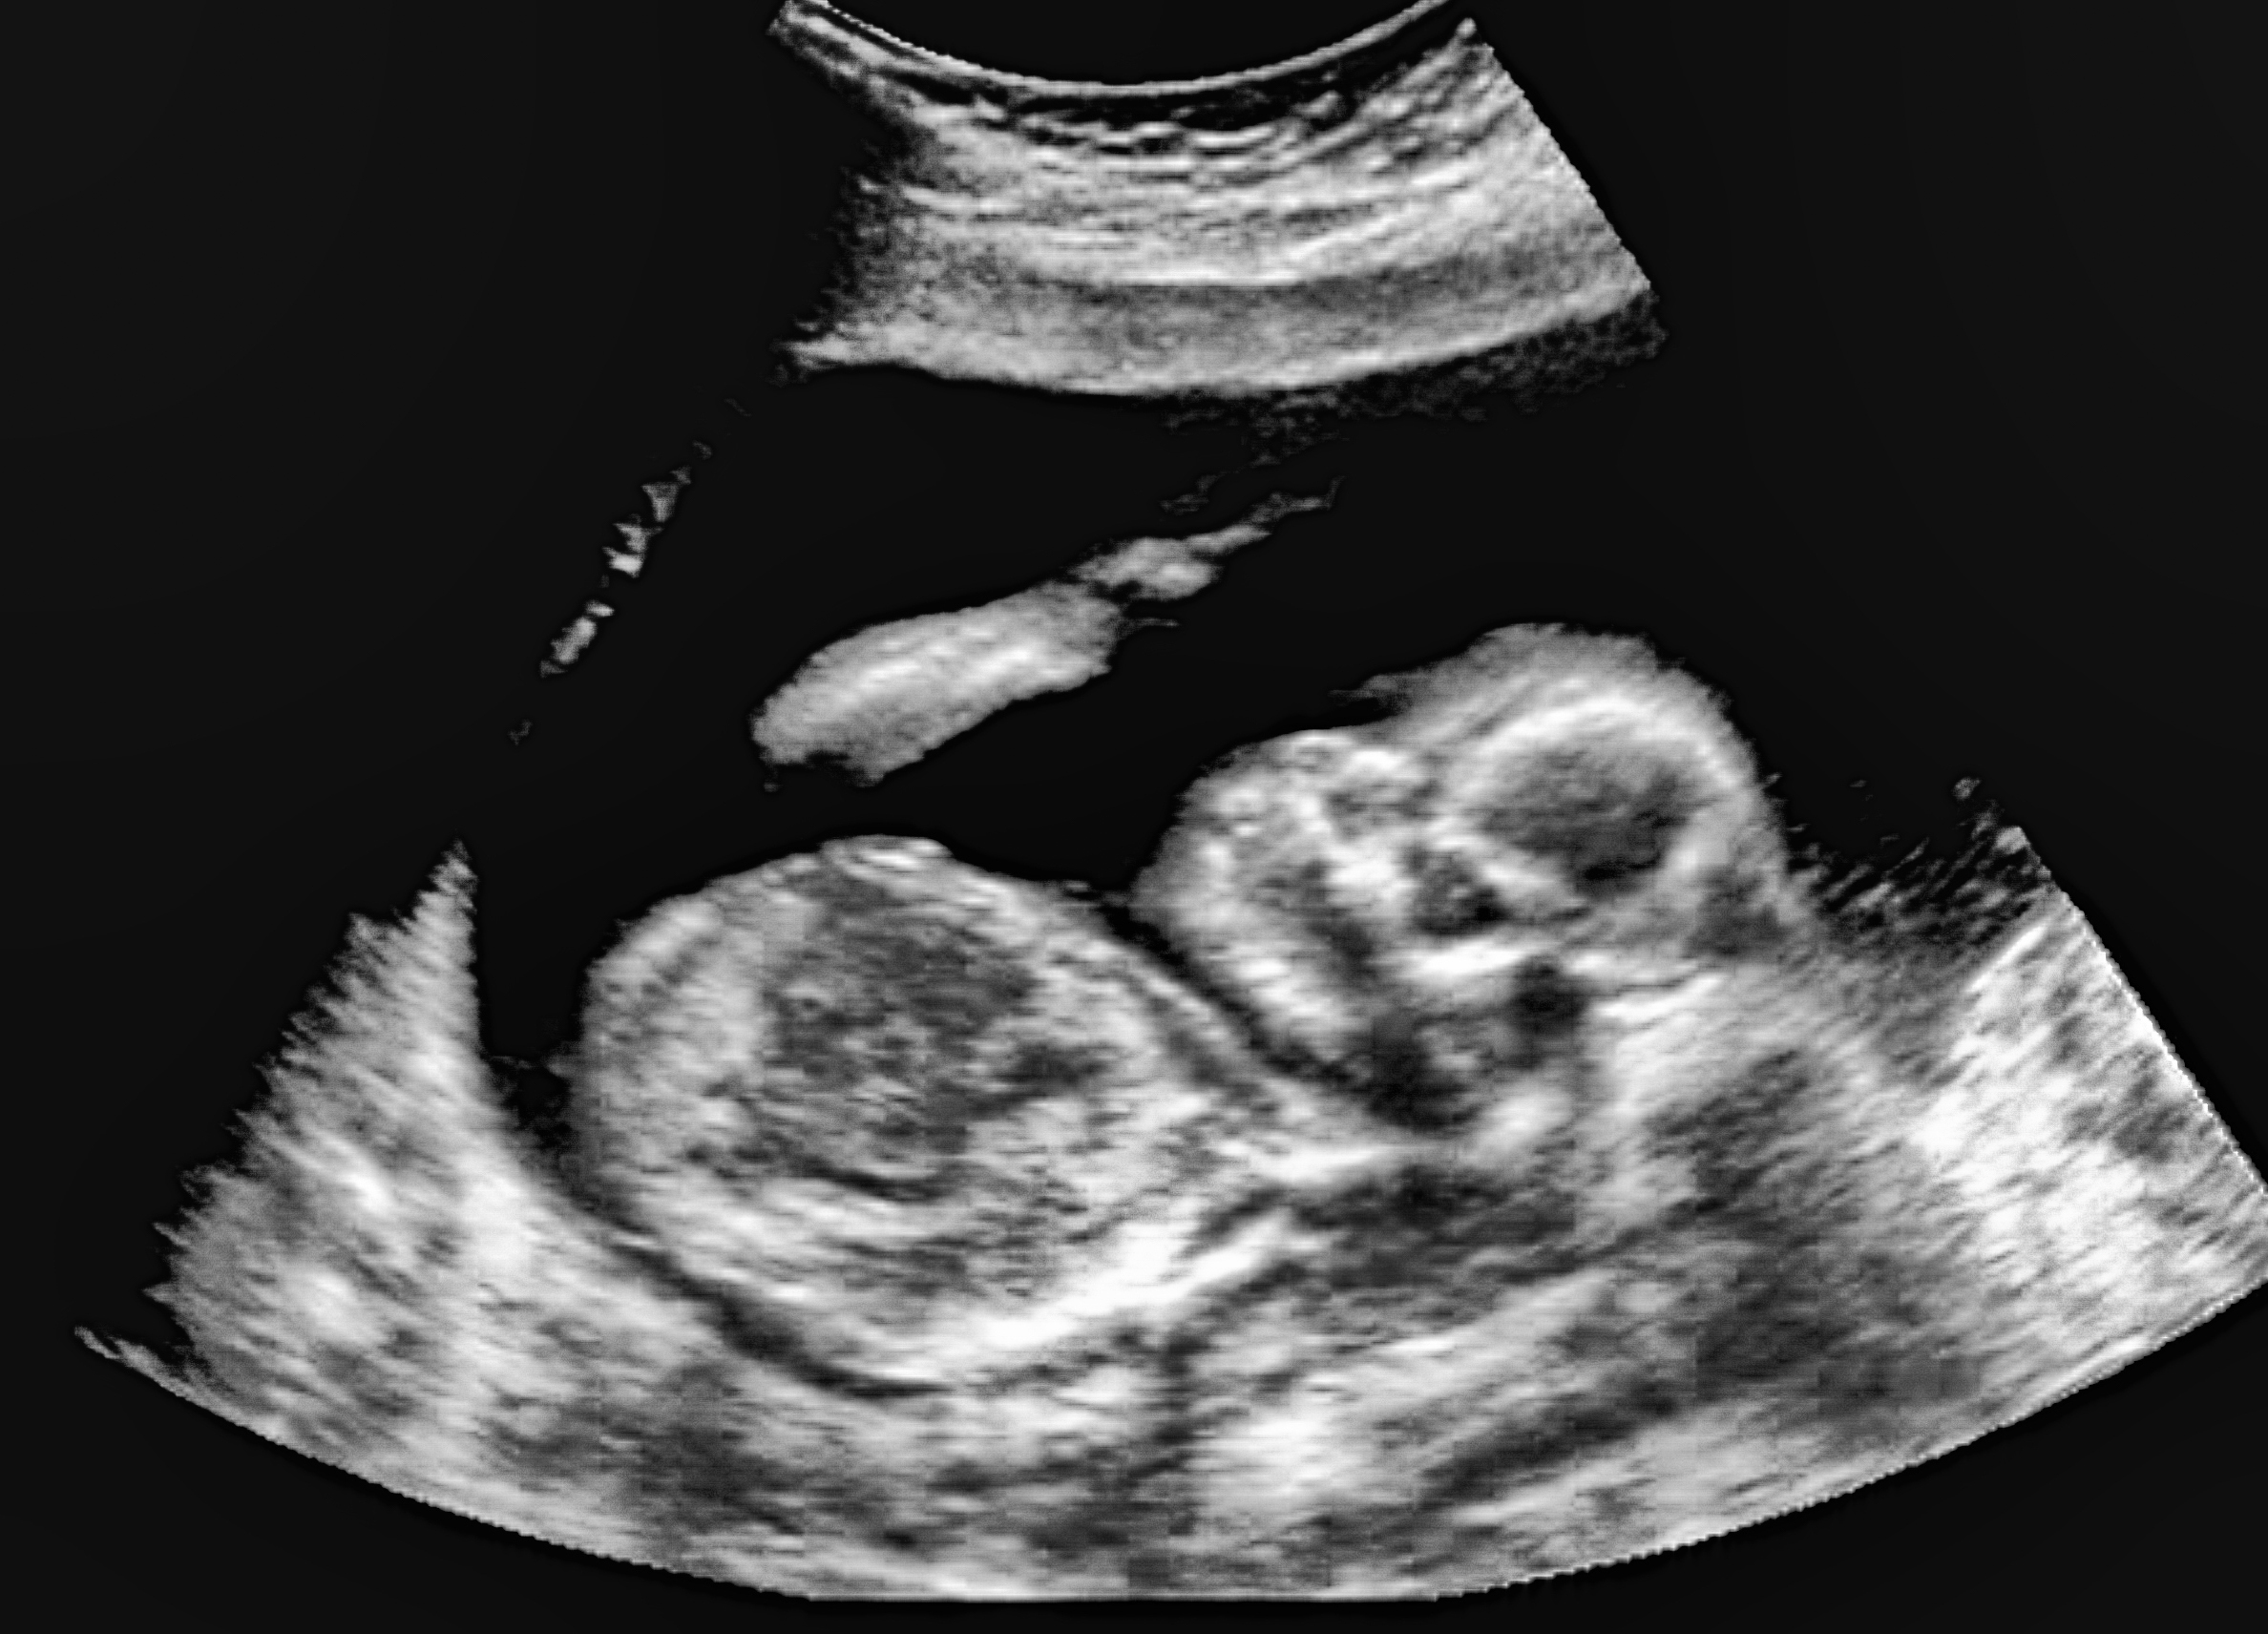 An ultrasound of a human fetus during the 16th week. GagliardiPhotography, Shutterstock. 